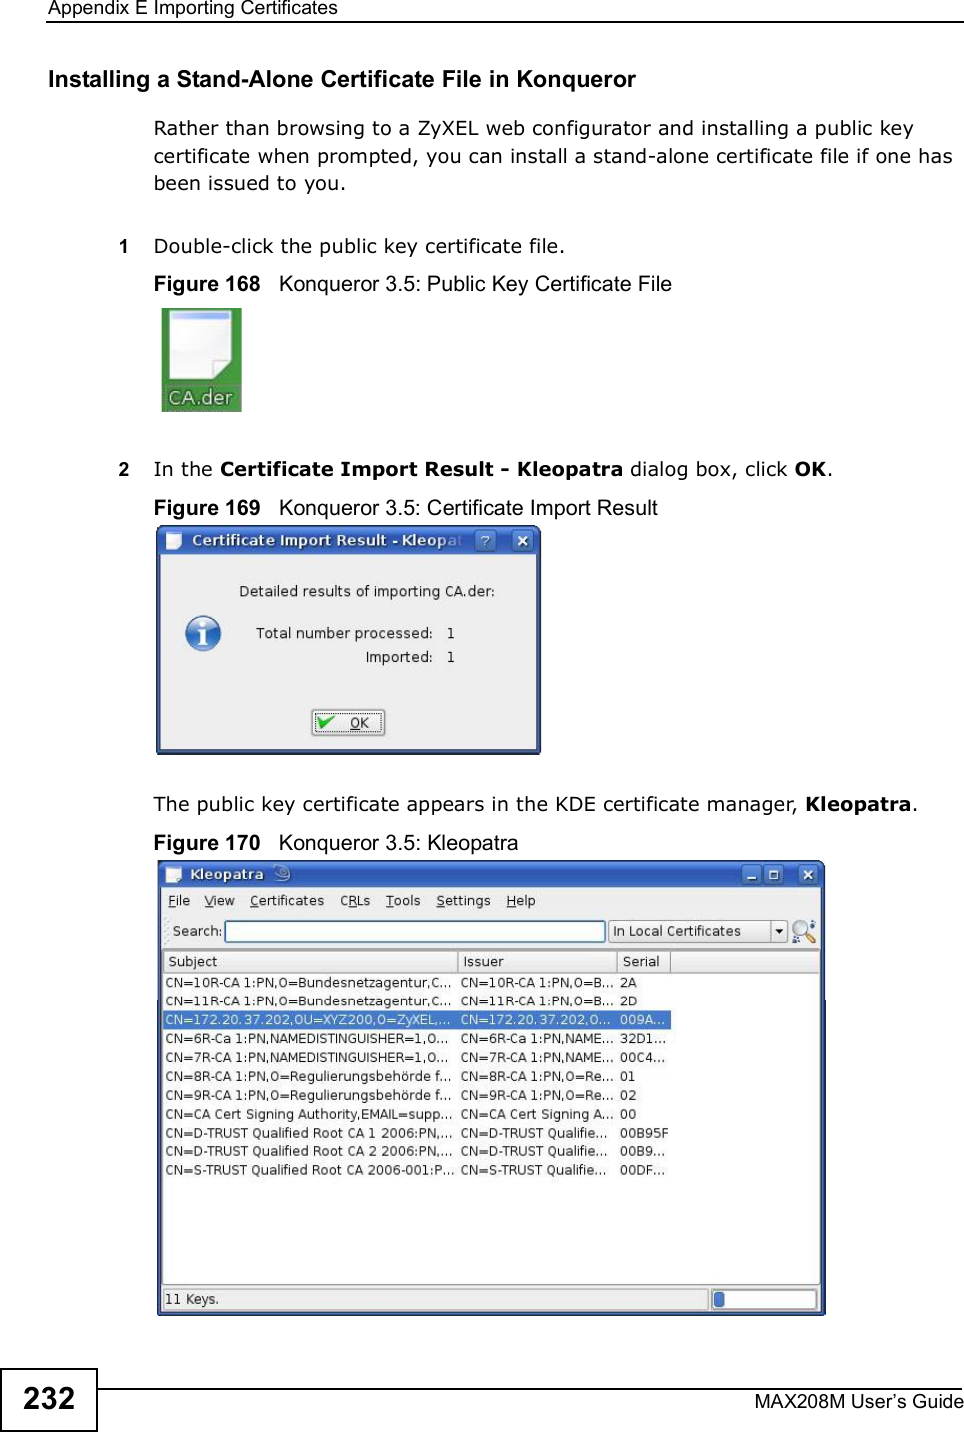 Appendix EImporting CertificatesMAX208M User s Guide232Installing a Stand-Alone Certificate File in KonquerorRather than browsing to a ZyXEL web configurator and installing a public key certificate when prompted, you can install a stand-alone certificate file if one has been issued to you.1Double-click the public key certificate file.Figure 168   Konqueror 3.5: Public Key Certificate File2In the Certificate Import Result - Kleopatra dialog box, click OK.Figure 169   Konqueror 3.5: Certificate Import ResultThe public key certificate appears in the KDE certificate manager, Kleopatra.Figure 170   Konqueror 3.5: Kleopatra